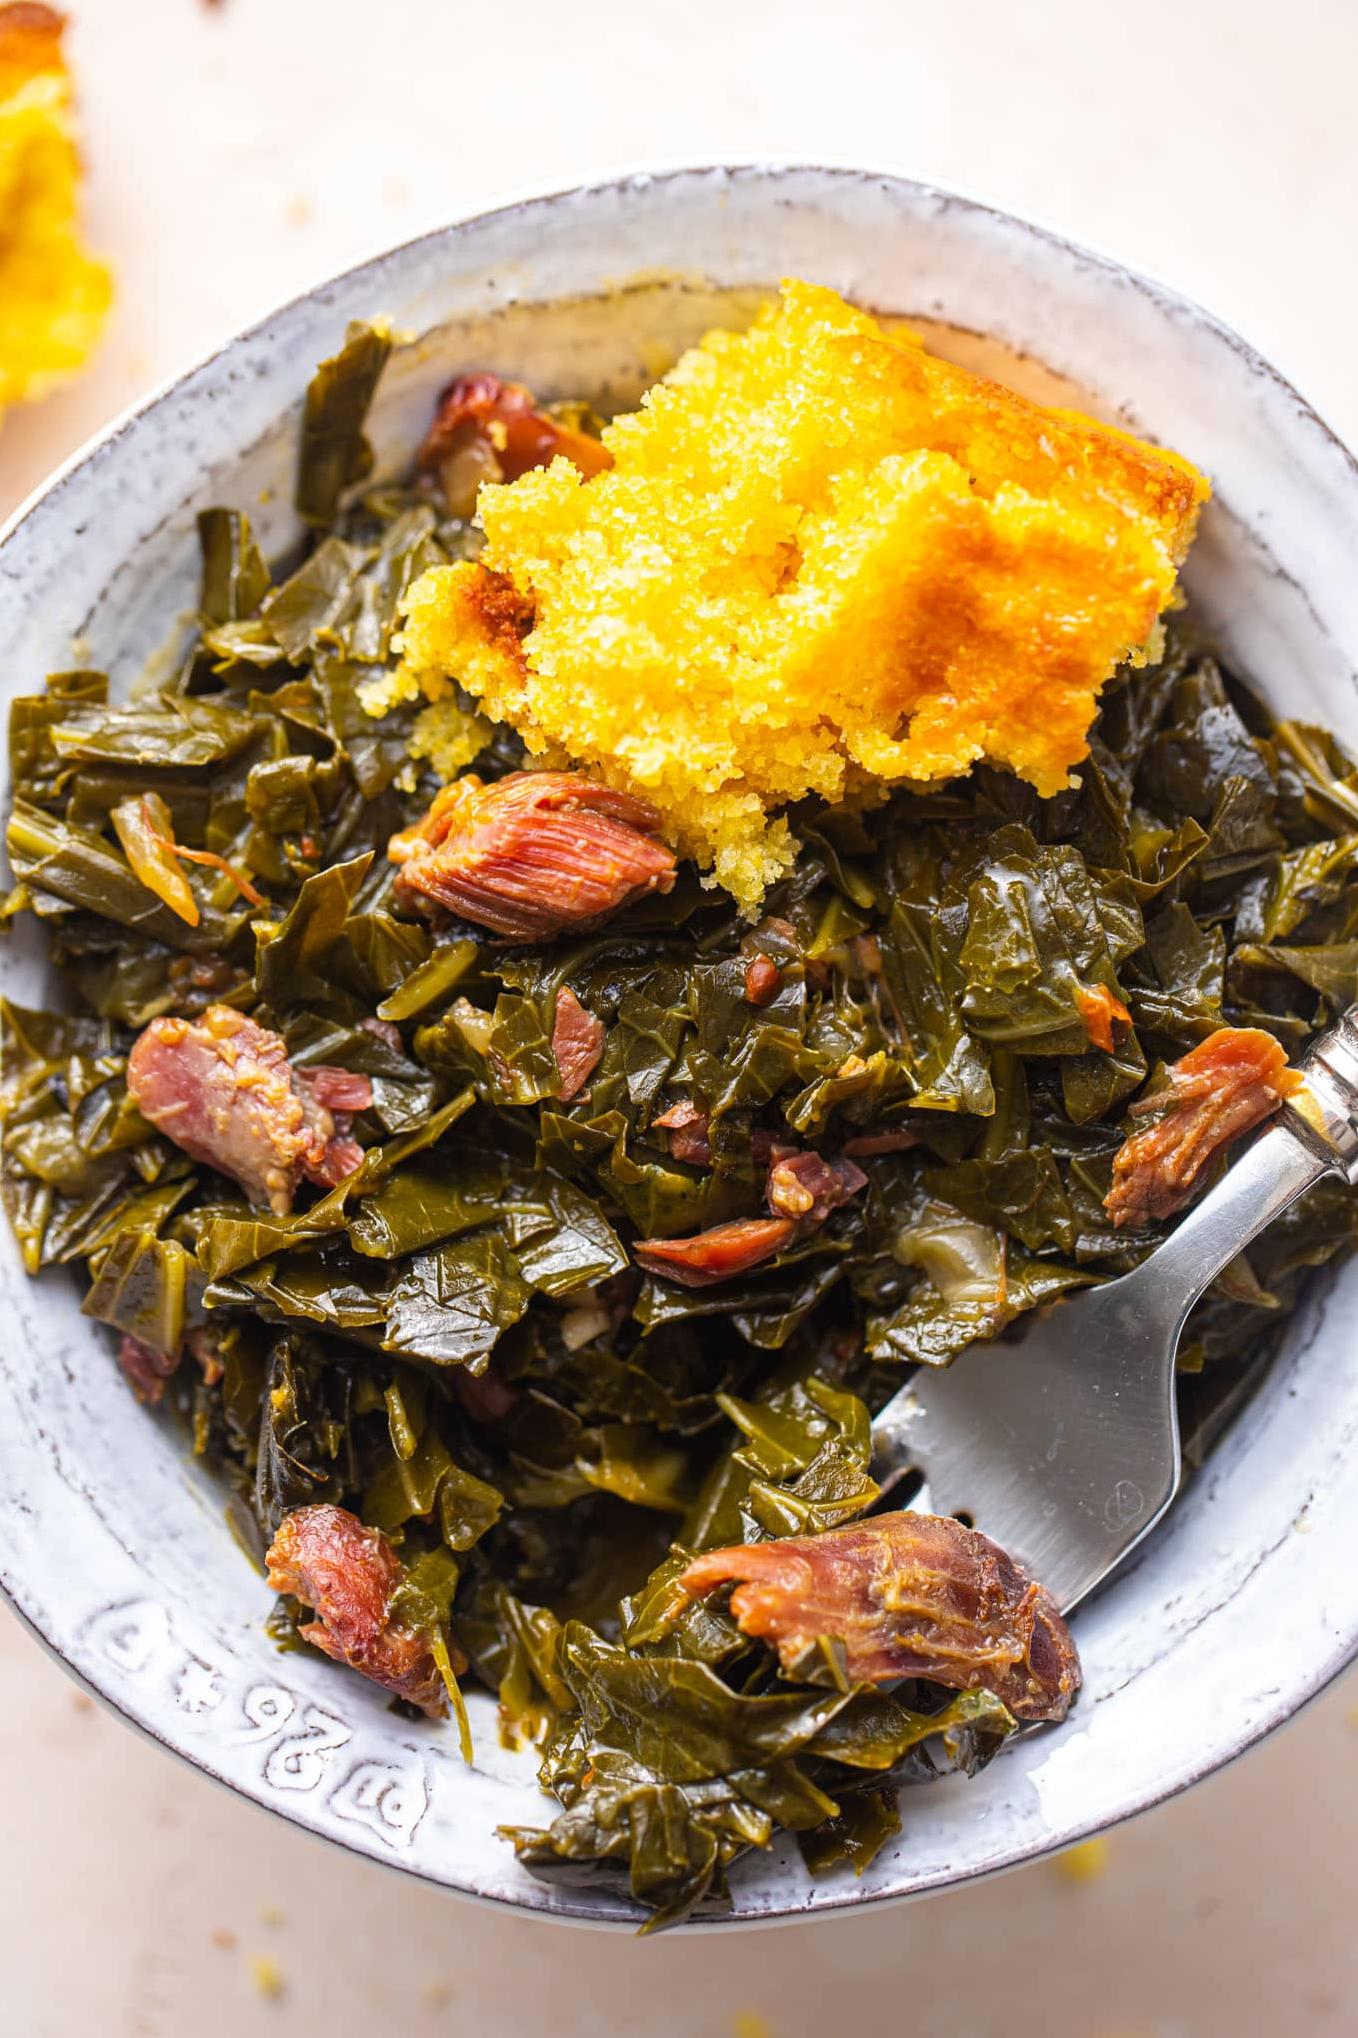  The perfect side dish for any southern-style feast